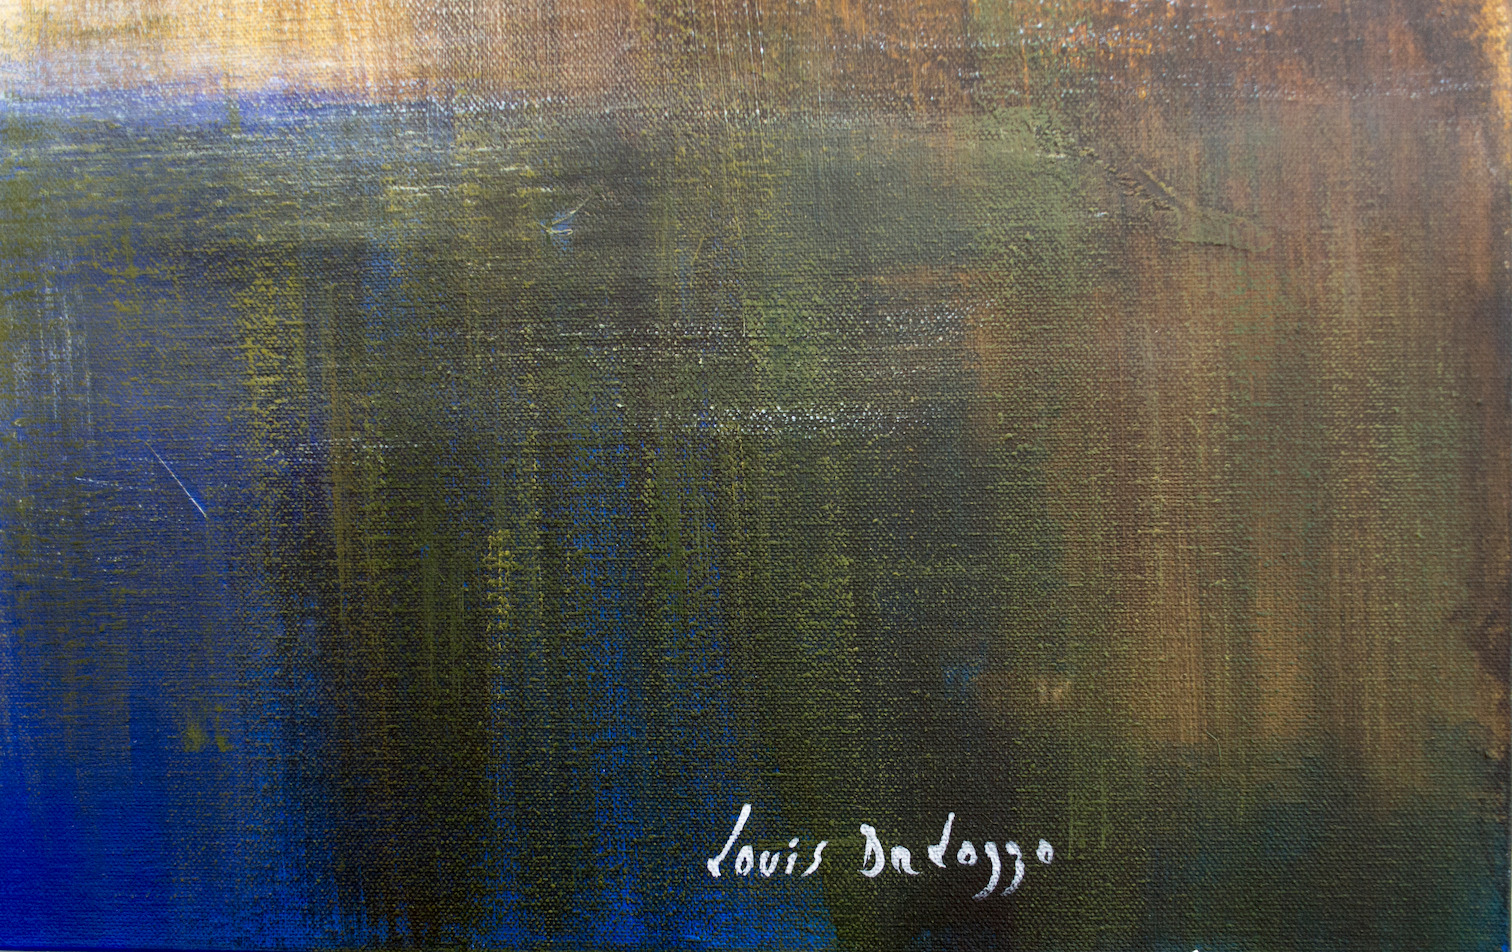 Close Up Signature Of Acrylic Painting "Reflections in Carnarvon Creek" By Louis Dalozzo